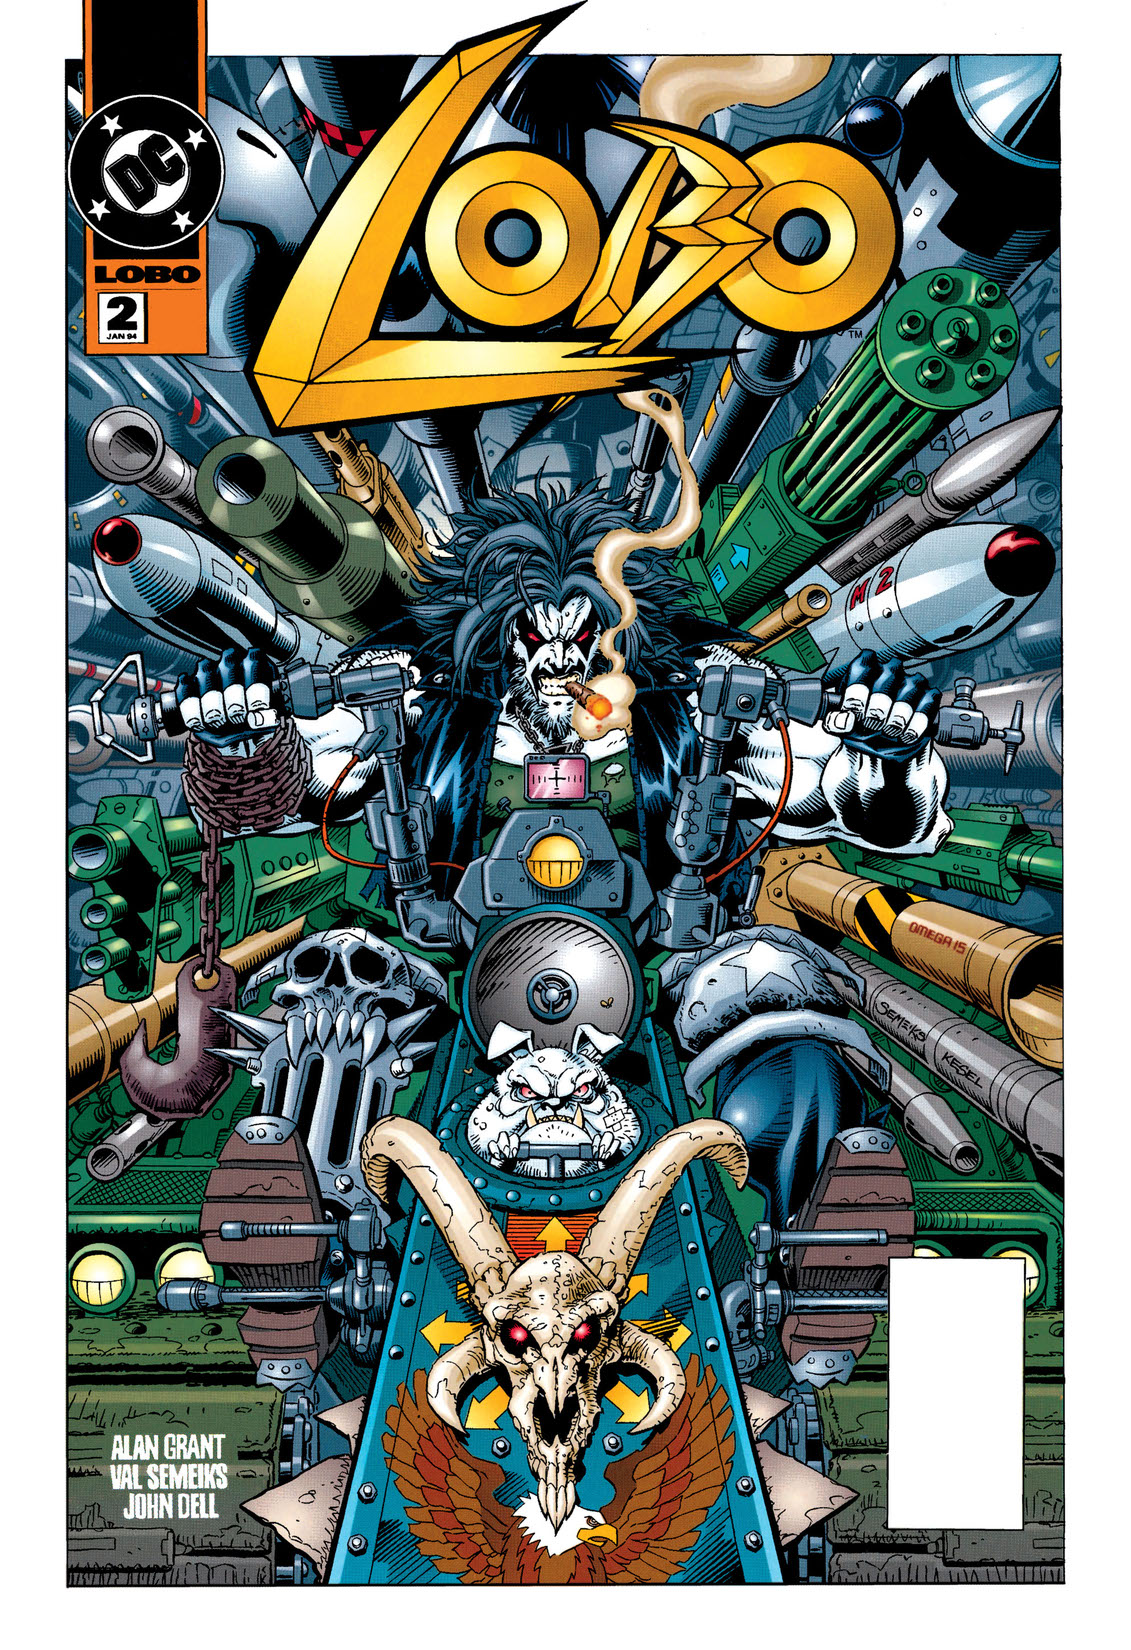 Lobo (1993-) #2 preview images